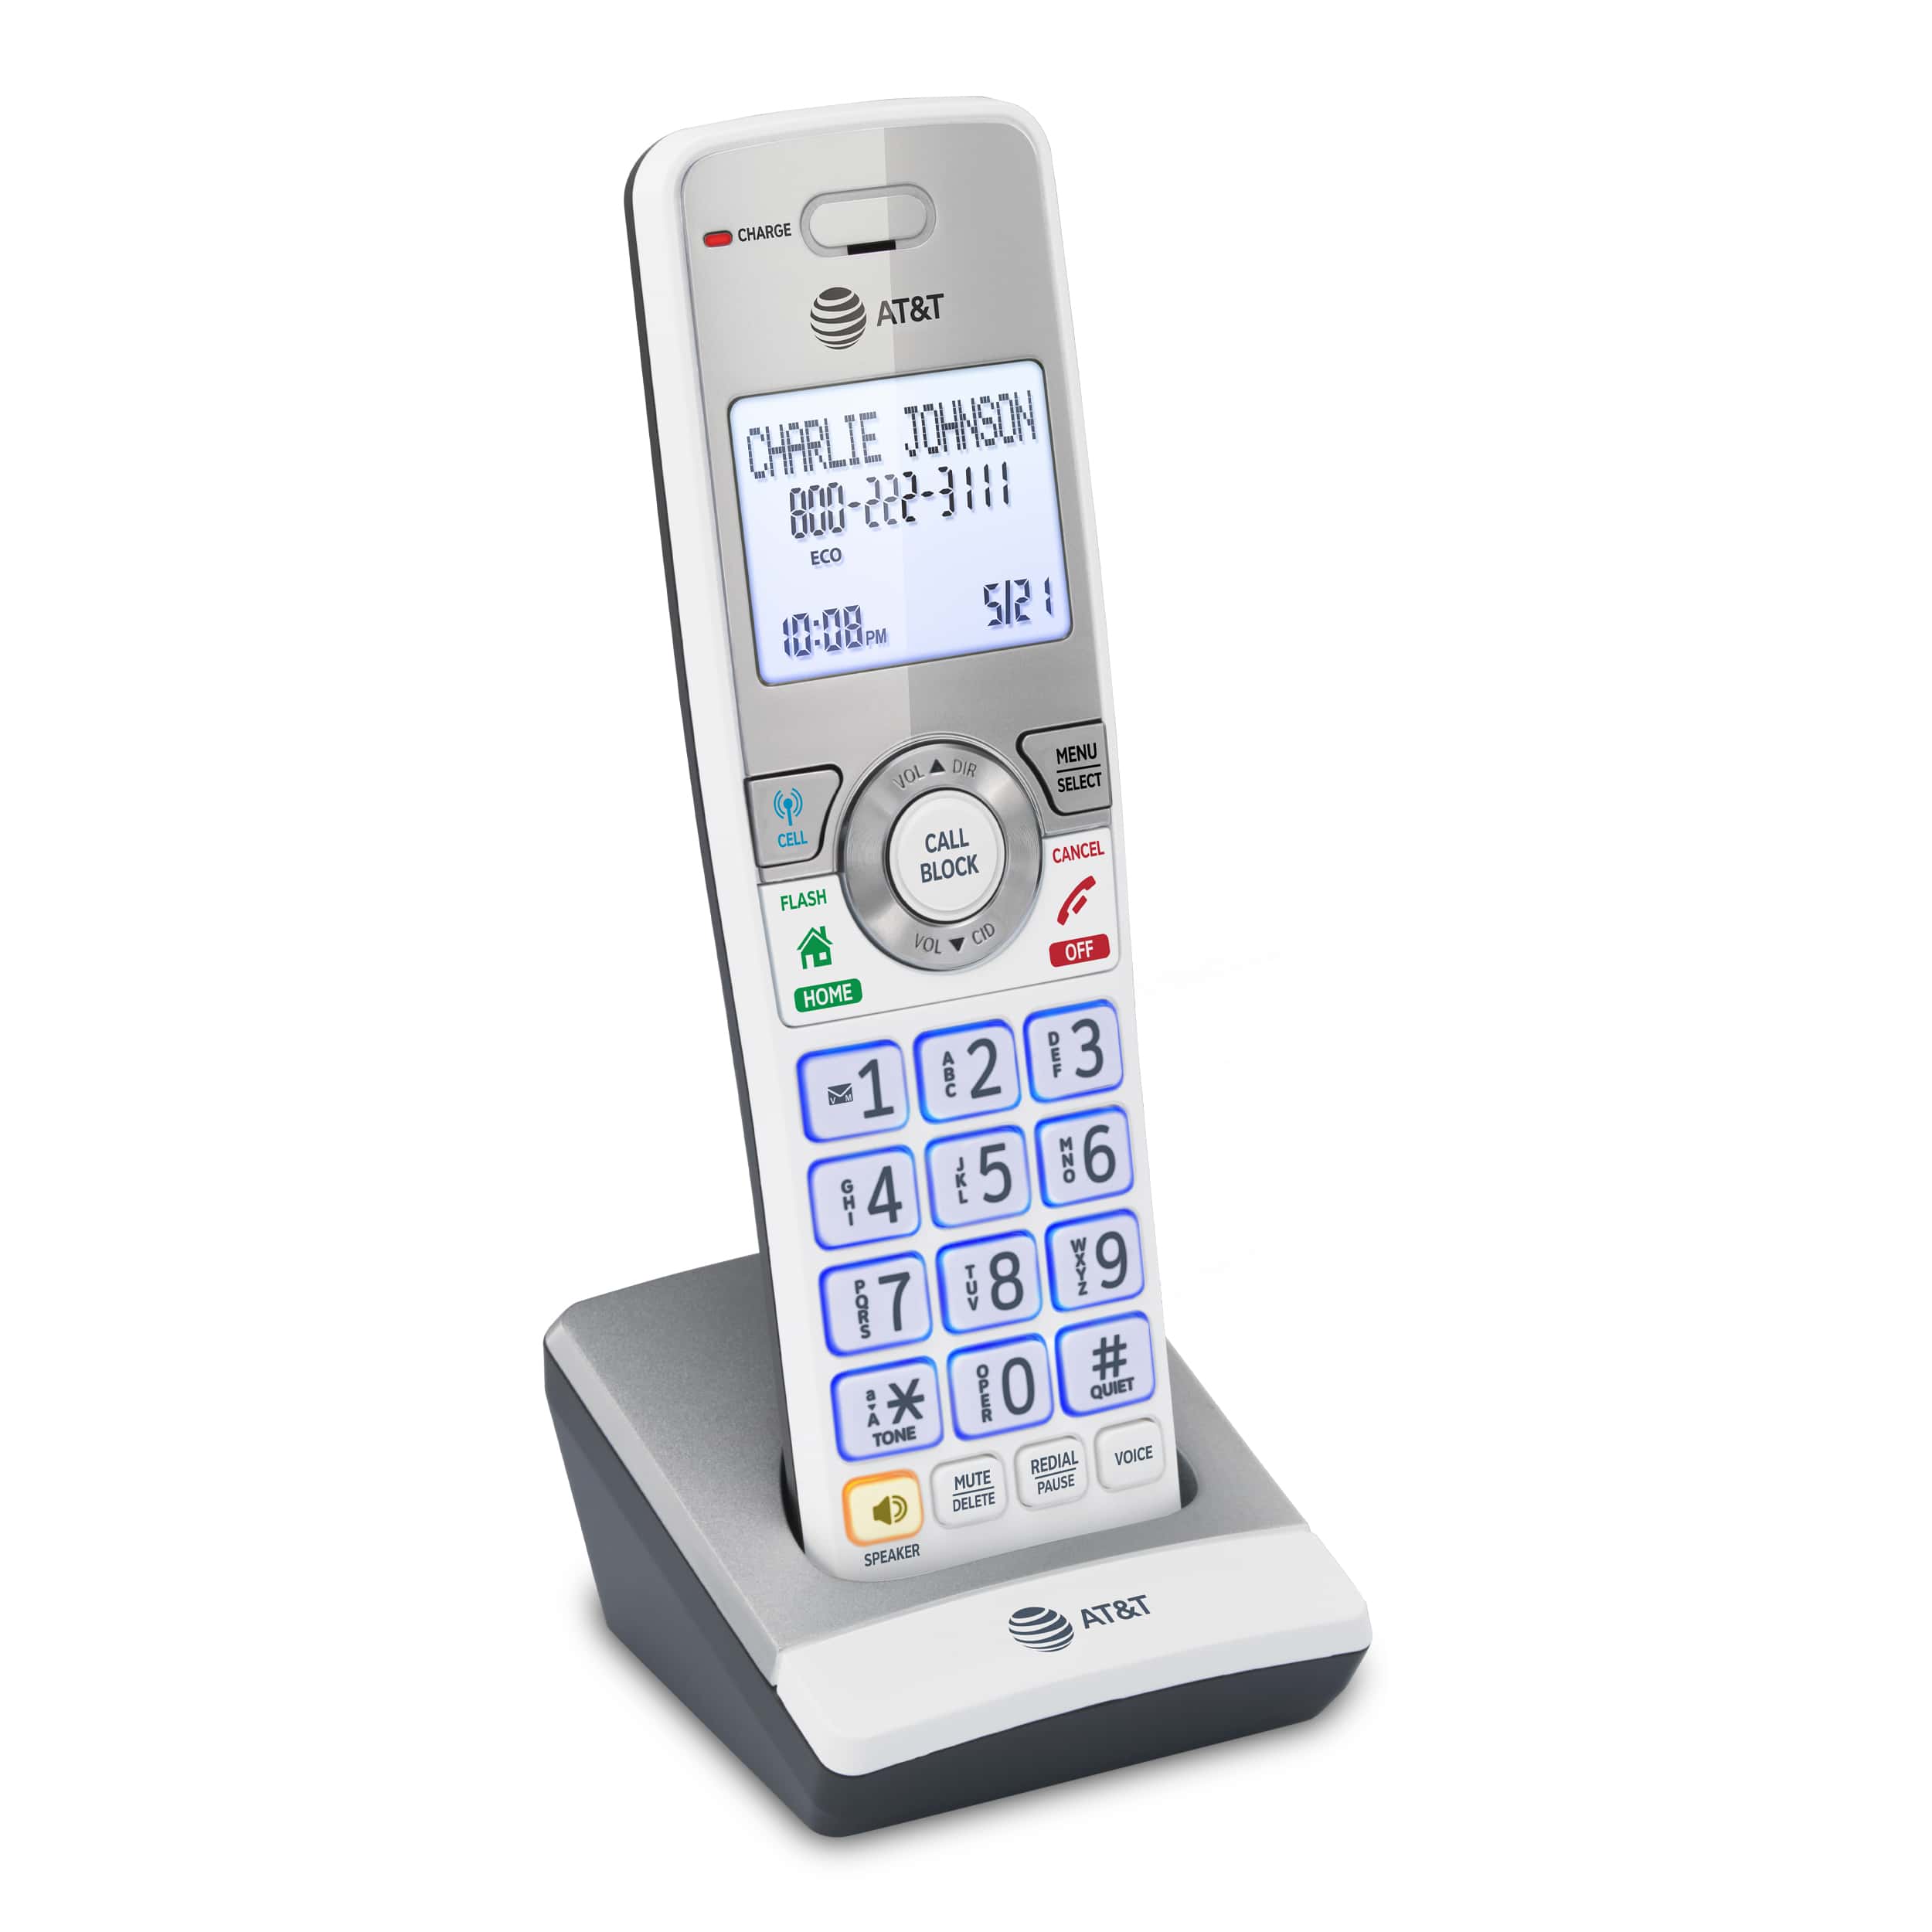 Accessory Handset with Unsurpassed Range, Bluetooth Connect to Cell, and Smart Call Blocker - view 2